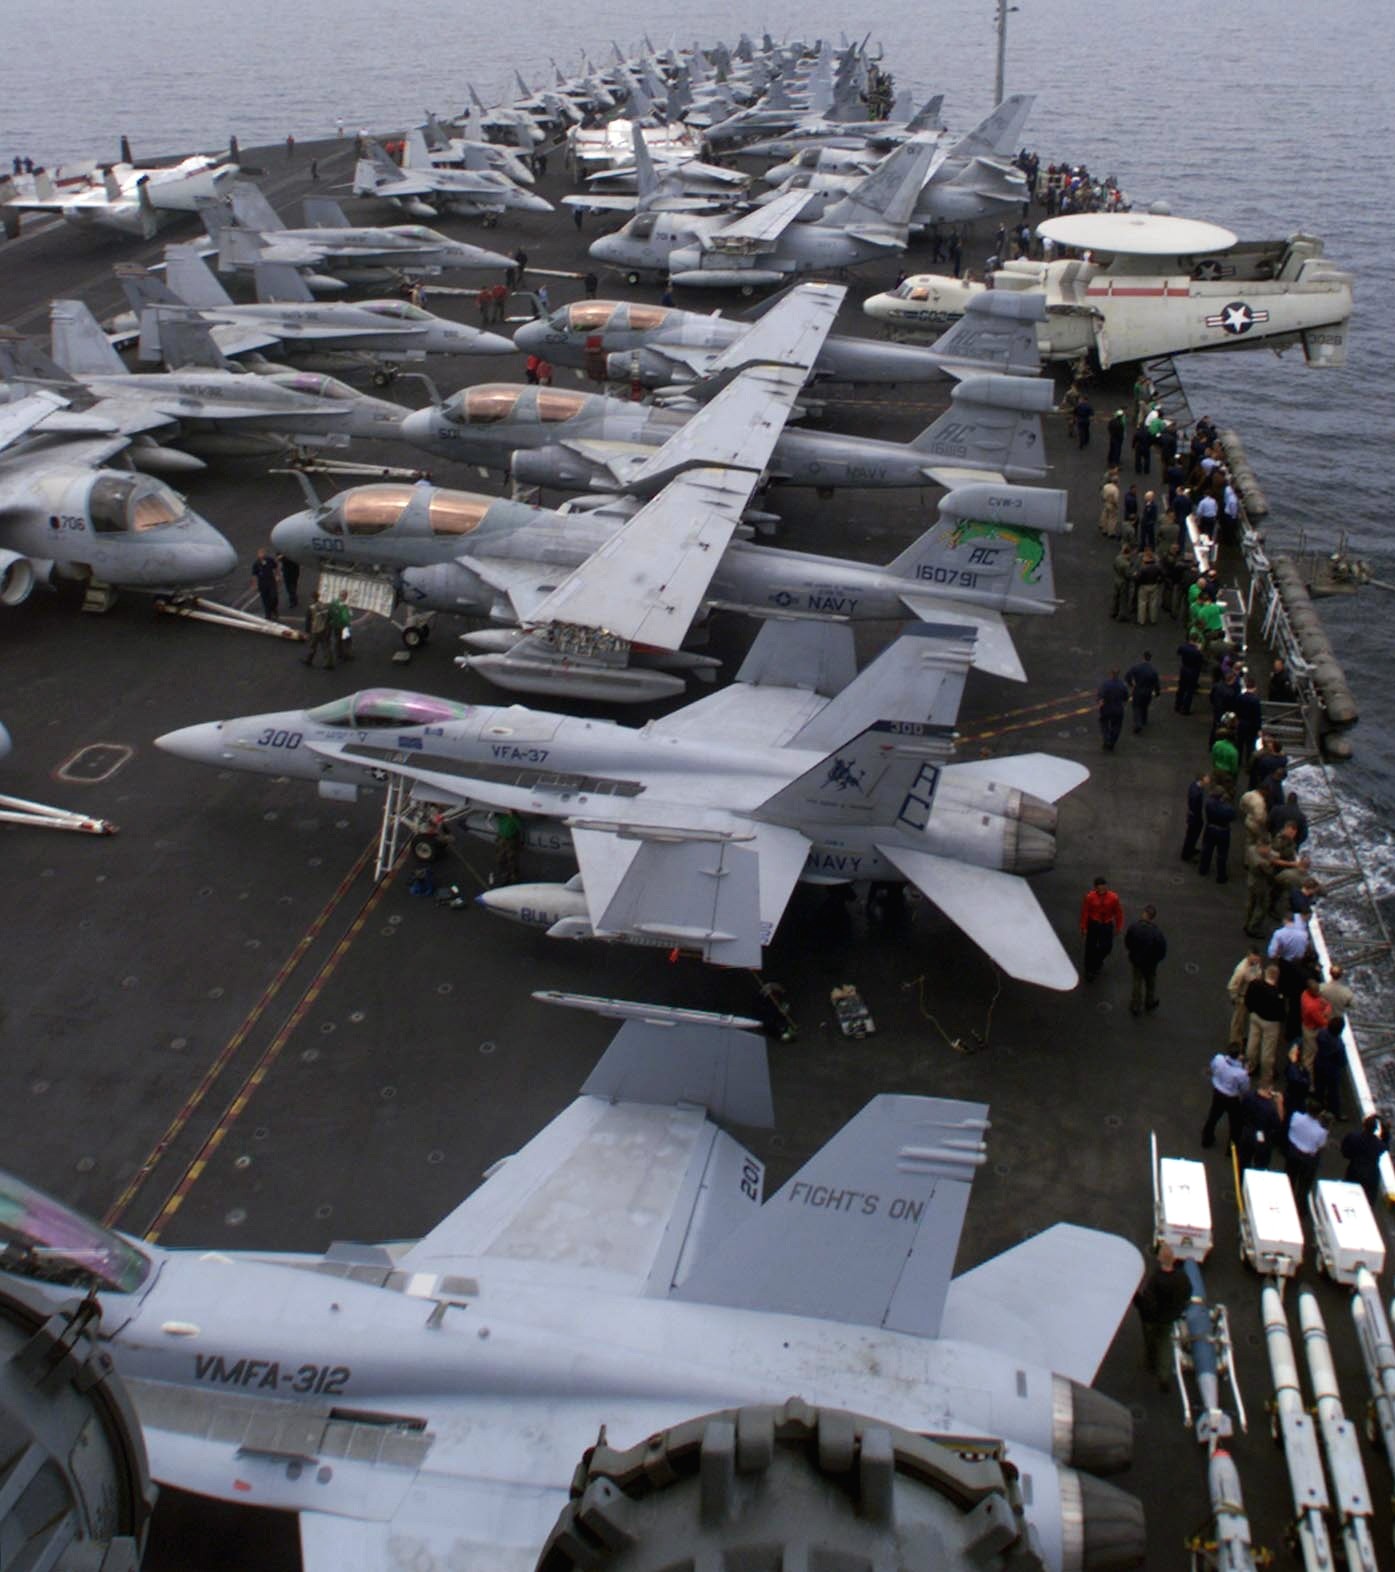 cvw-3 carrier air wing us navy uss harry s. truman cvn-75 embarked squadrons 04